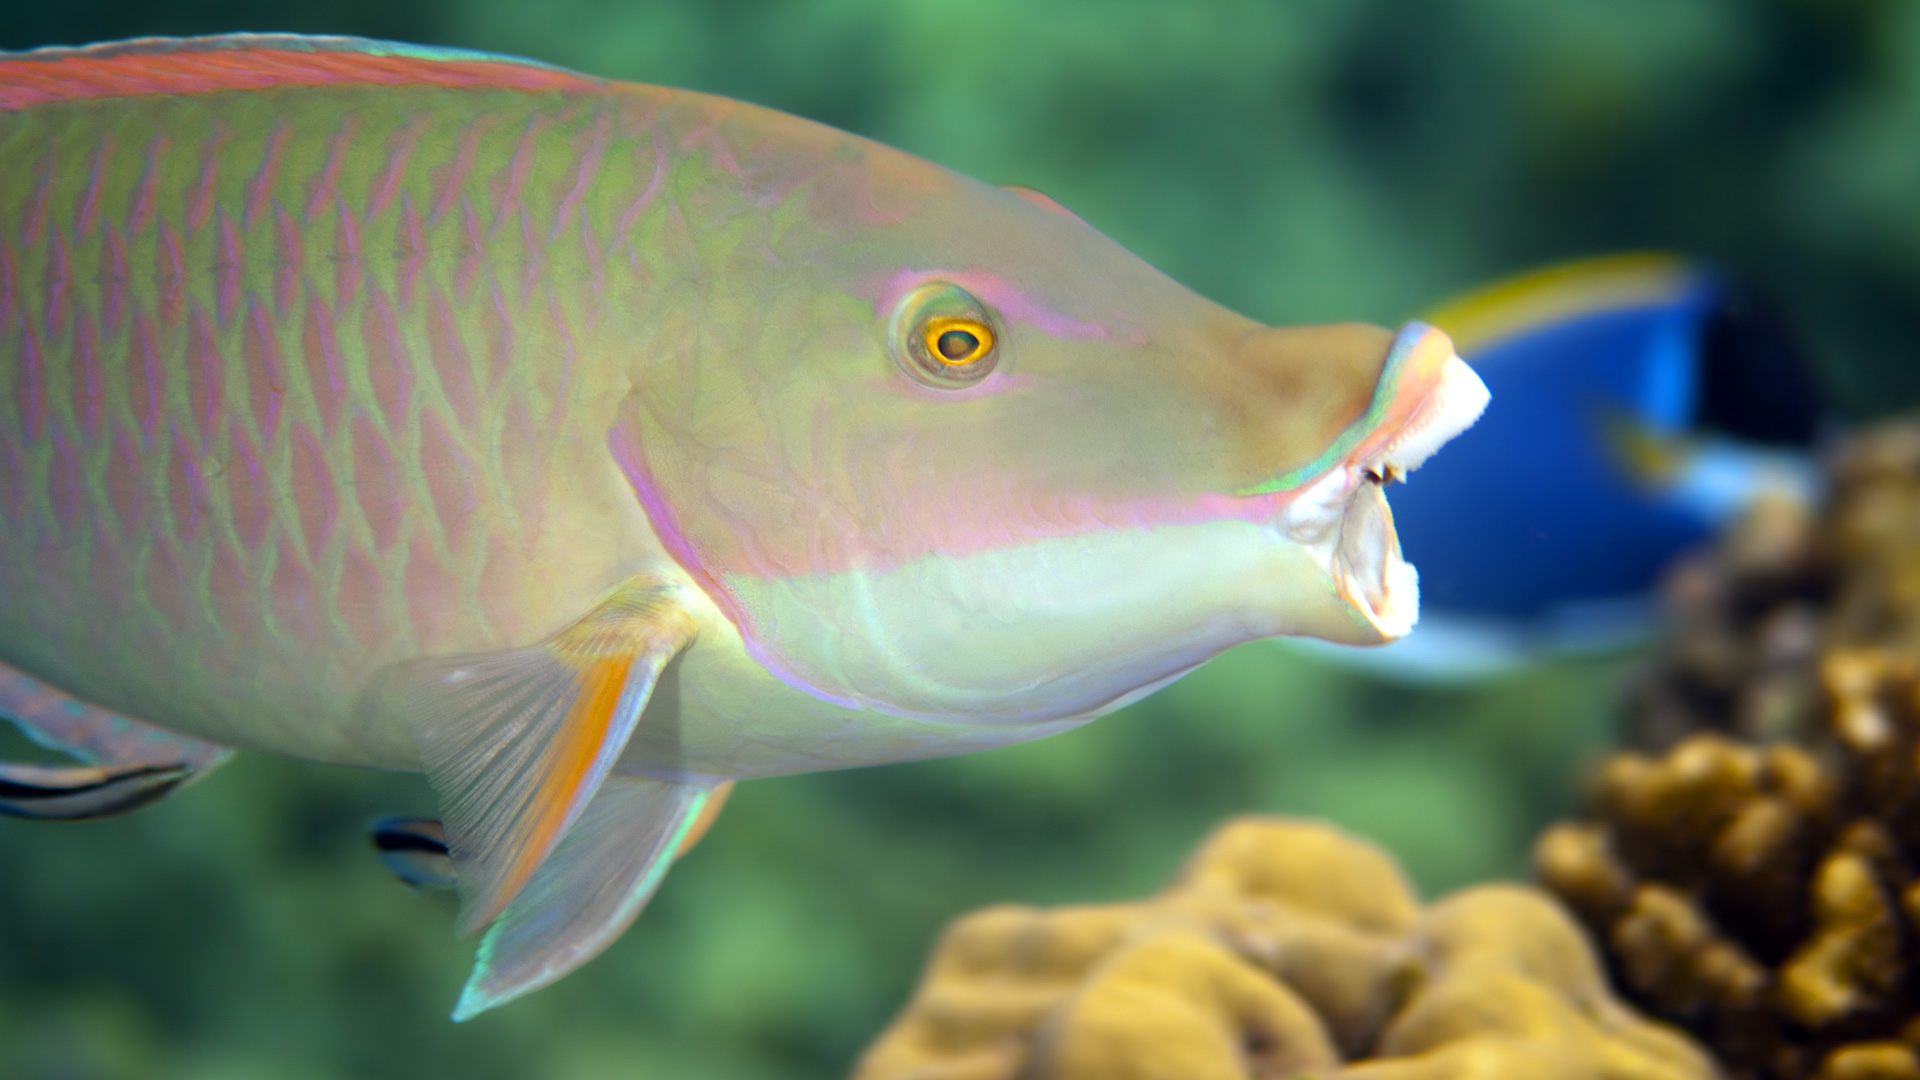 Candelamoa parrotfish at a cleaning station